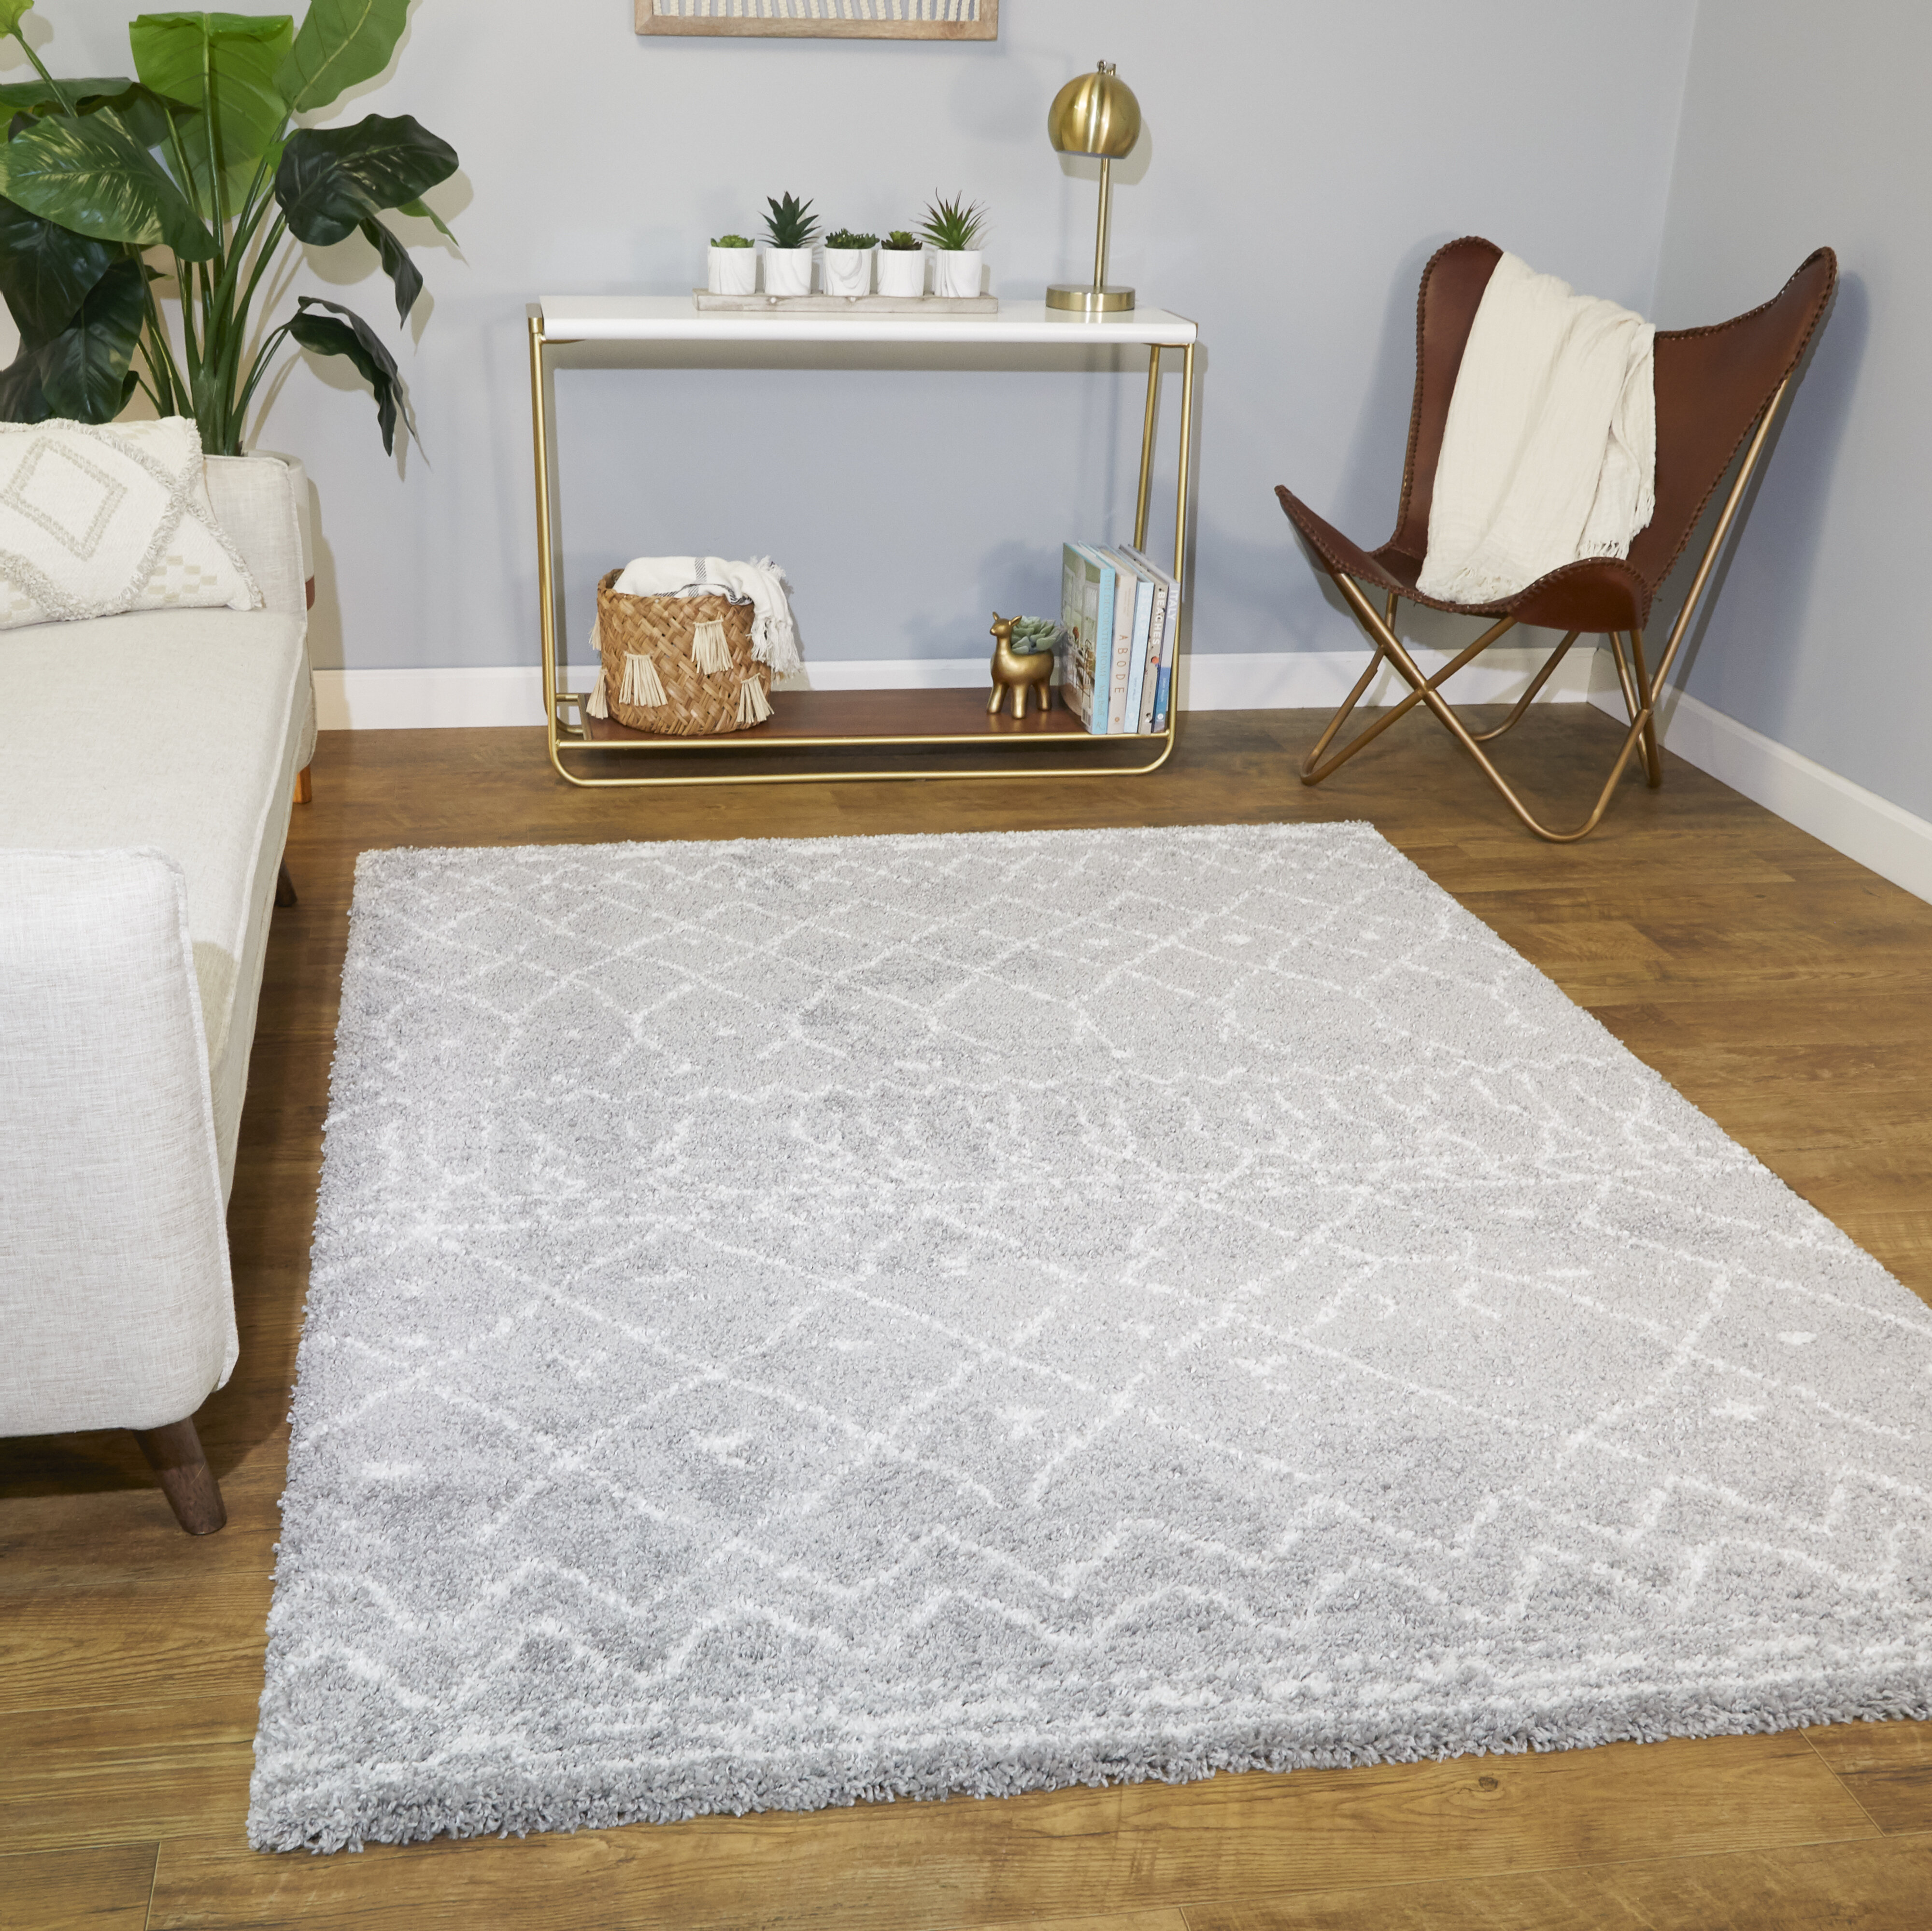 ALAZA Zen Stone Sand Lily Area Rug Rugs Mat for Living Room Bedroom 6'x4'